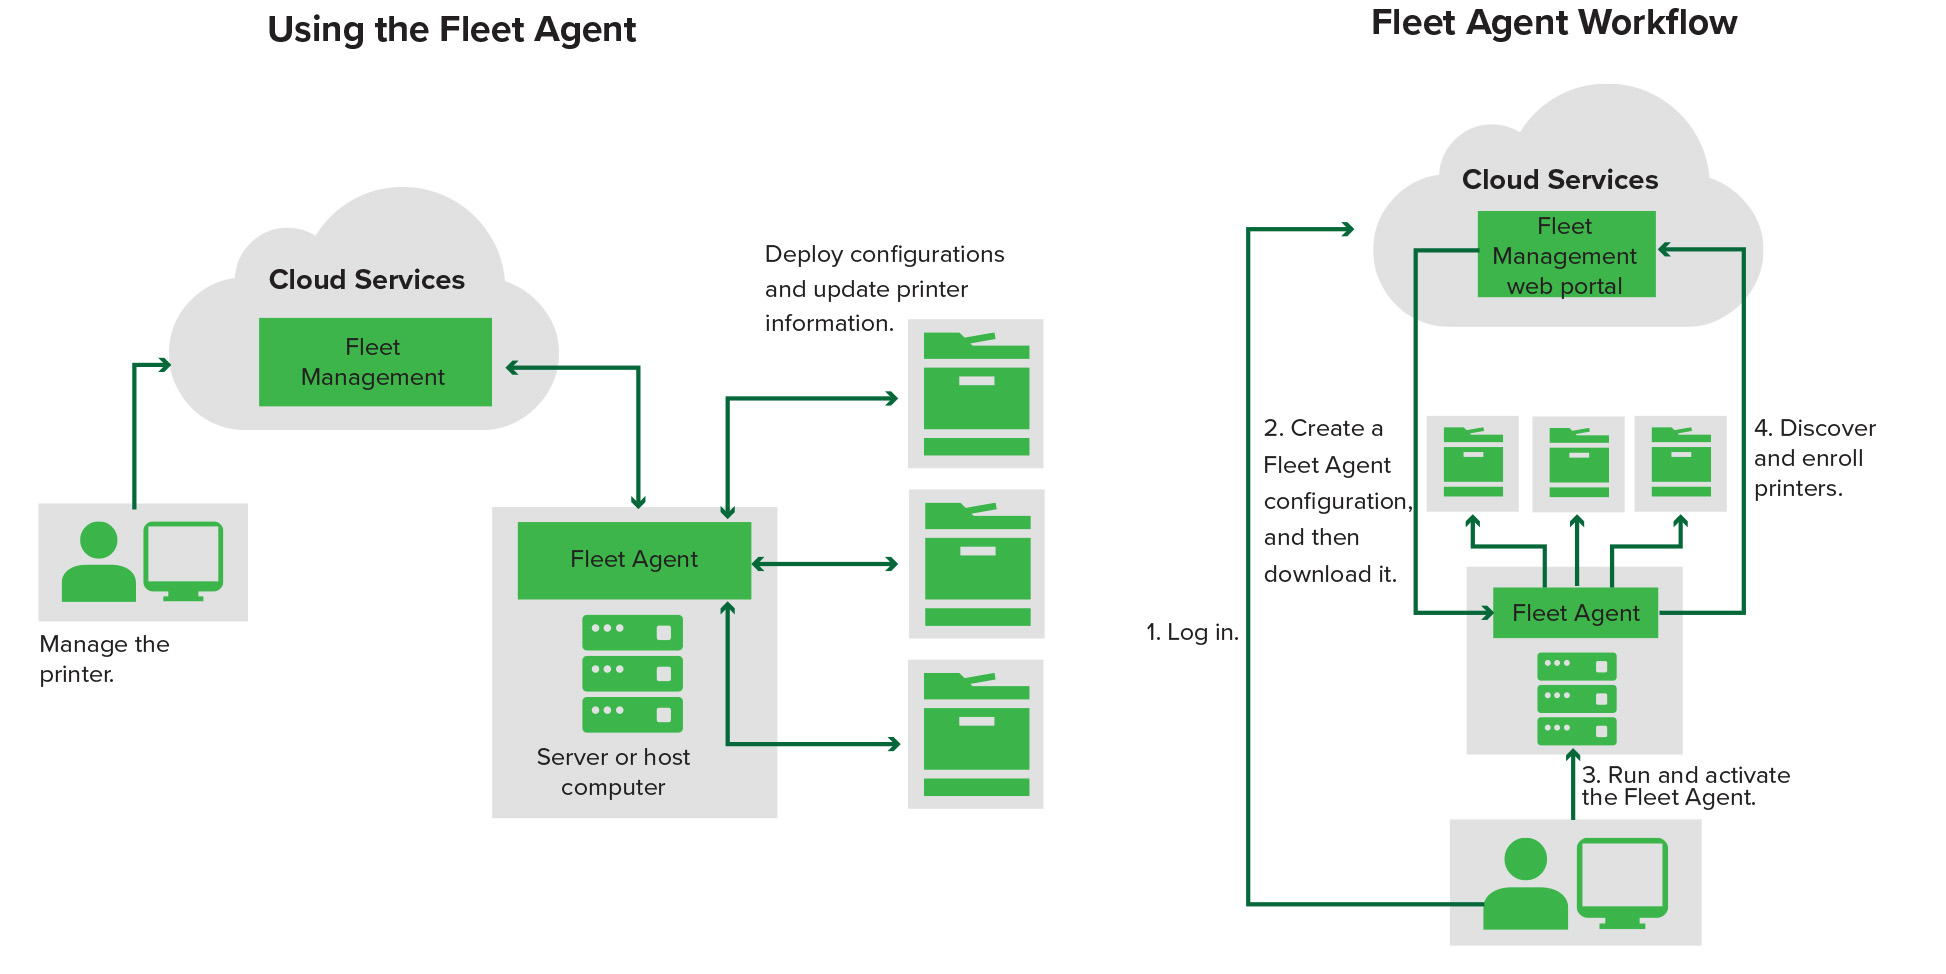 A workflow showing printer management and configuration in the Fleet Management portal using the Fleet Agent.